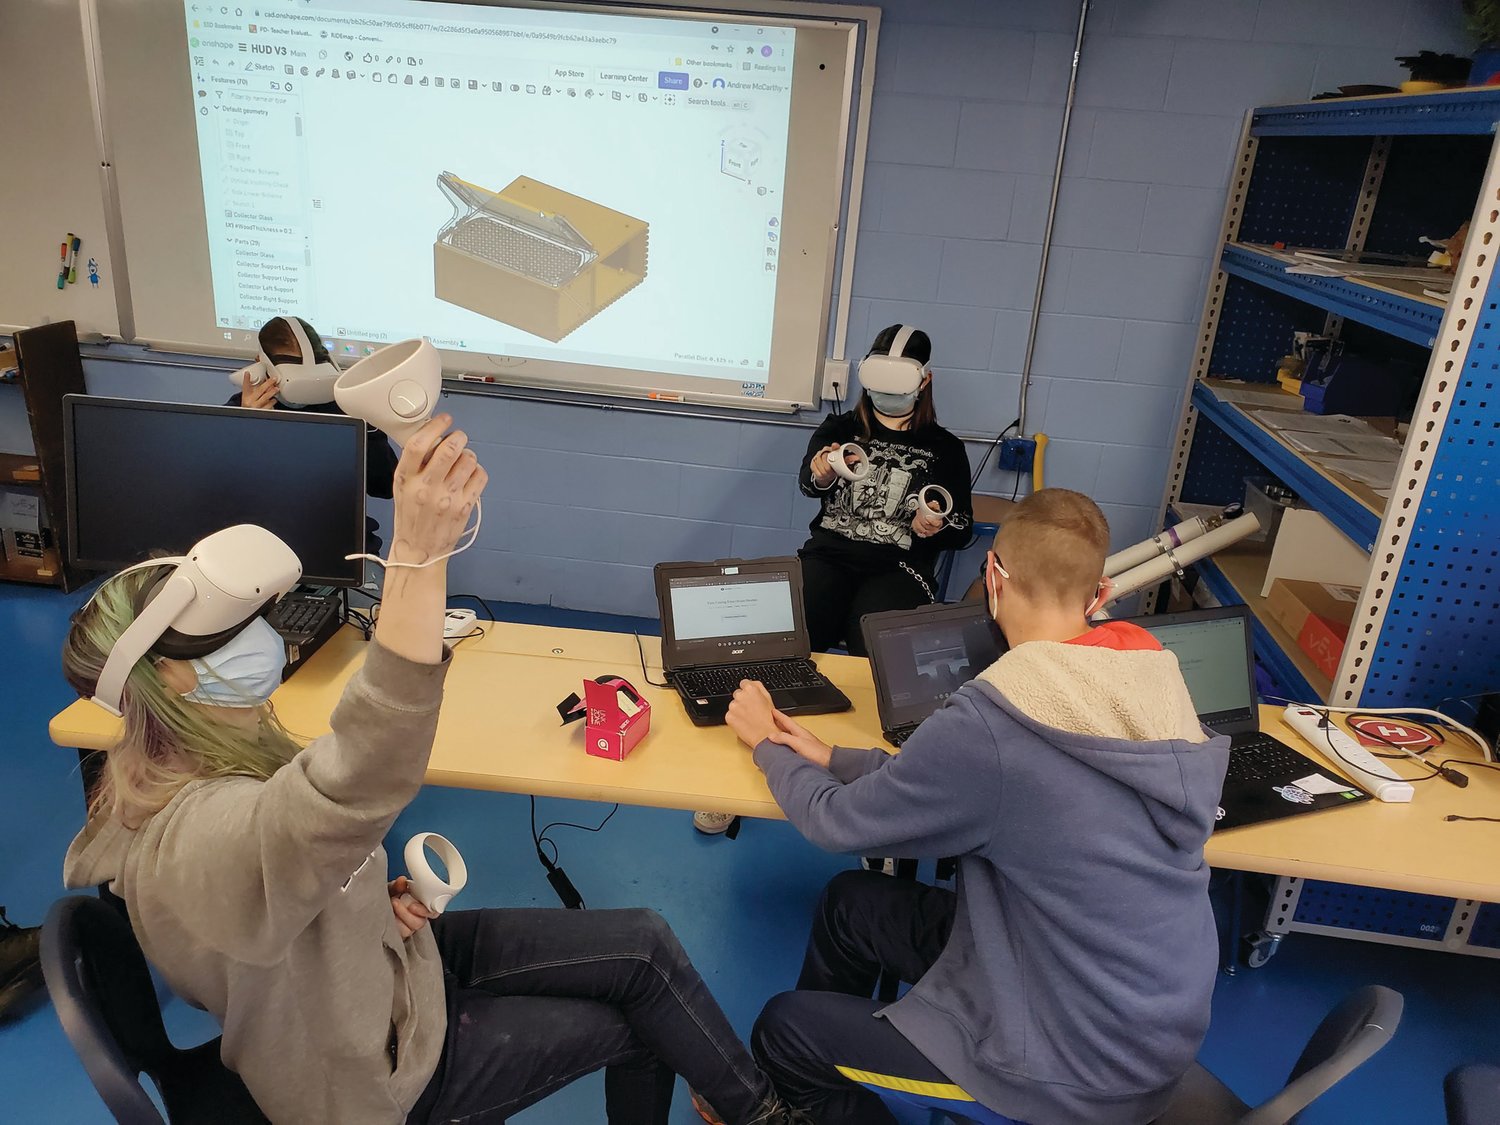 THE OTHER VIRTUAL LEARNING: Scituate students adjust a machine in a virtual reality environment. The Scituate Career & Technology Education program uses virtual reality and GIS technology to help students explore potential career options.